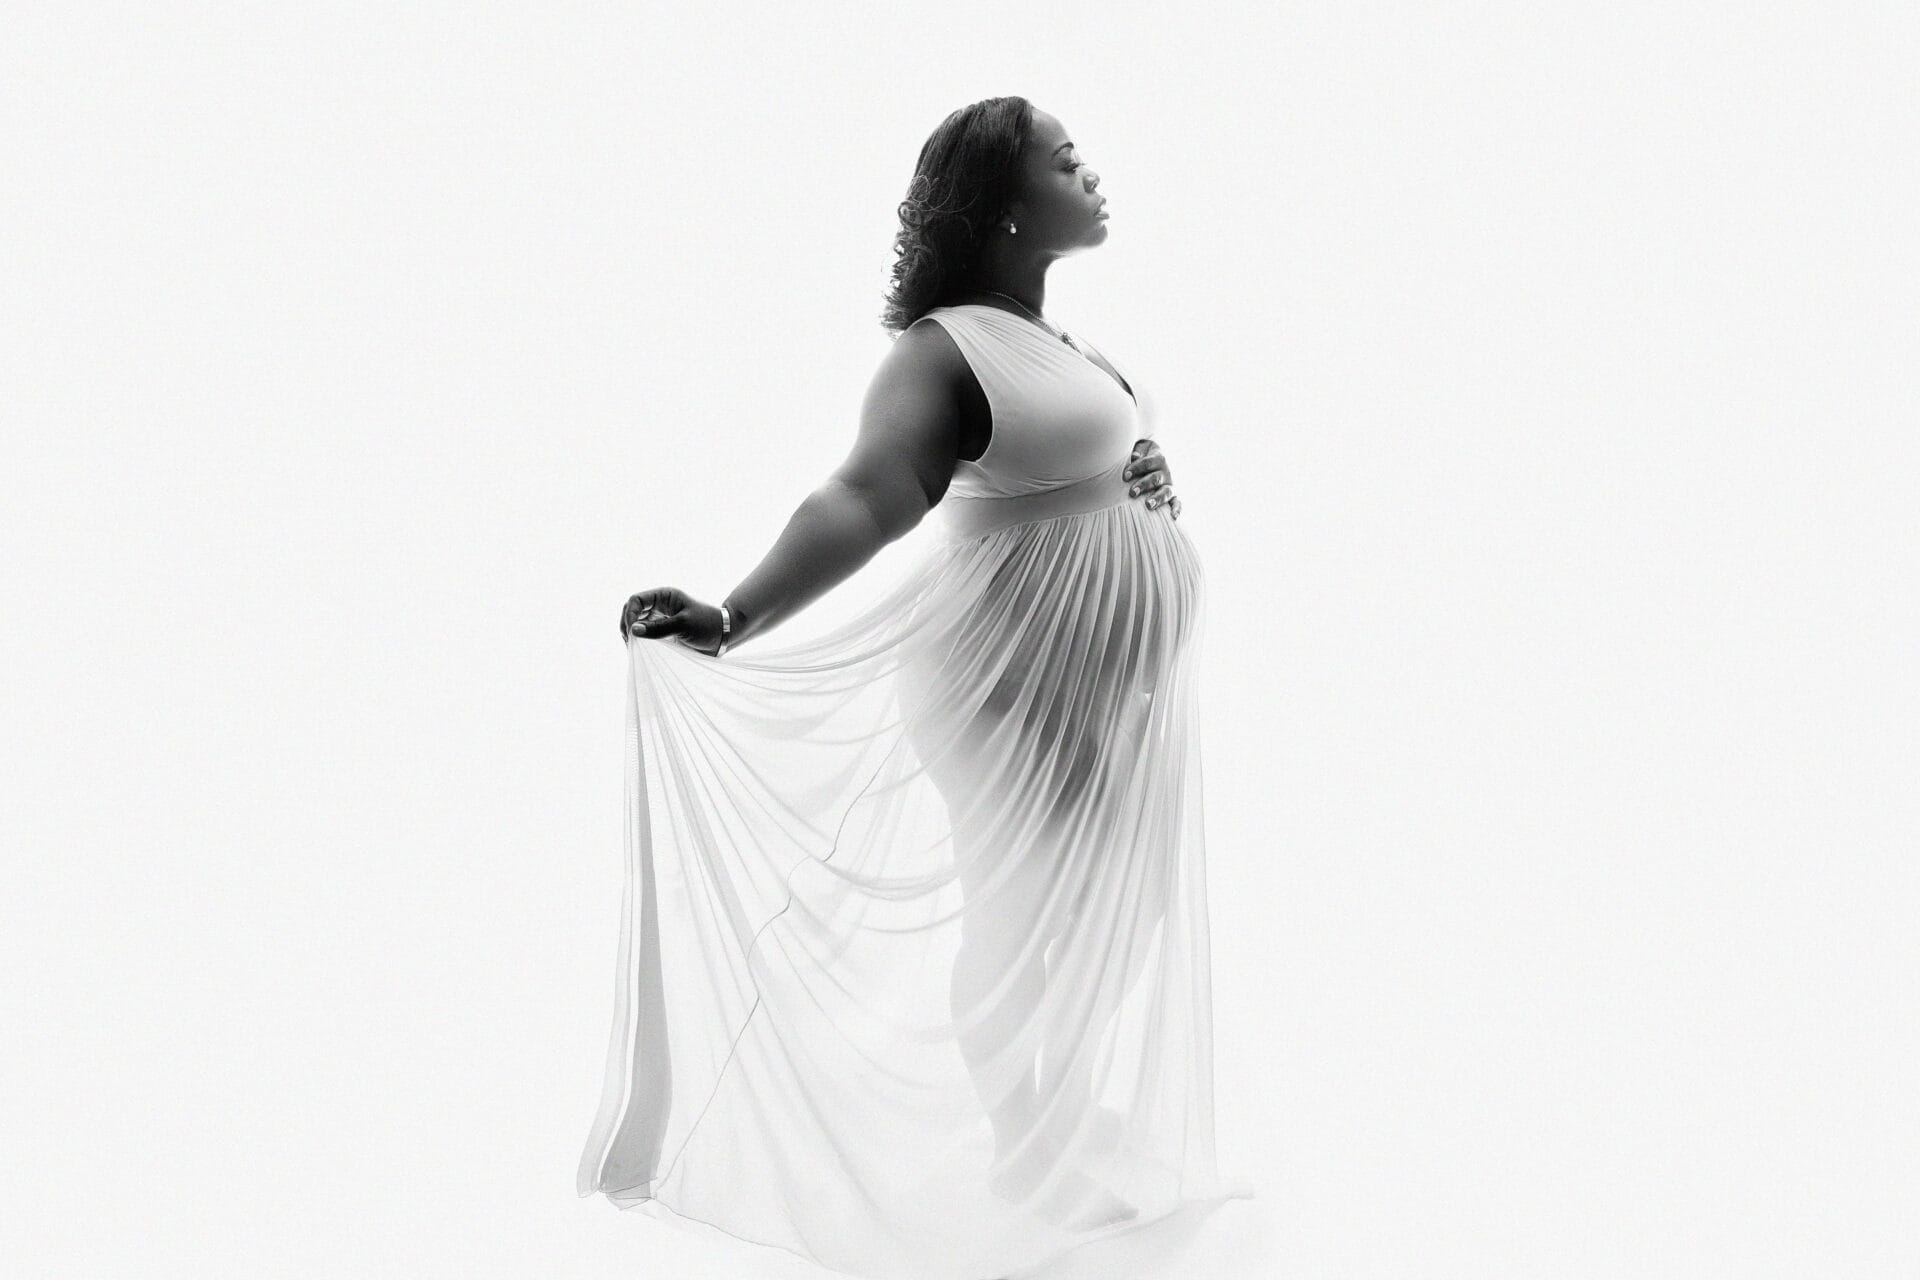 In the studio with a mom-to-be in an elegant white gown as the wind blew her hair, embracing her pregnant belly.